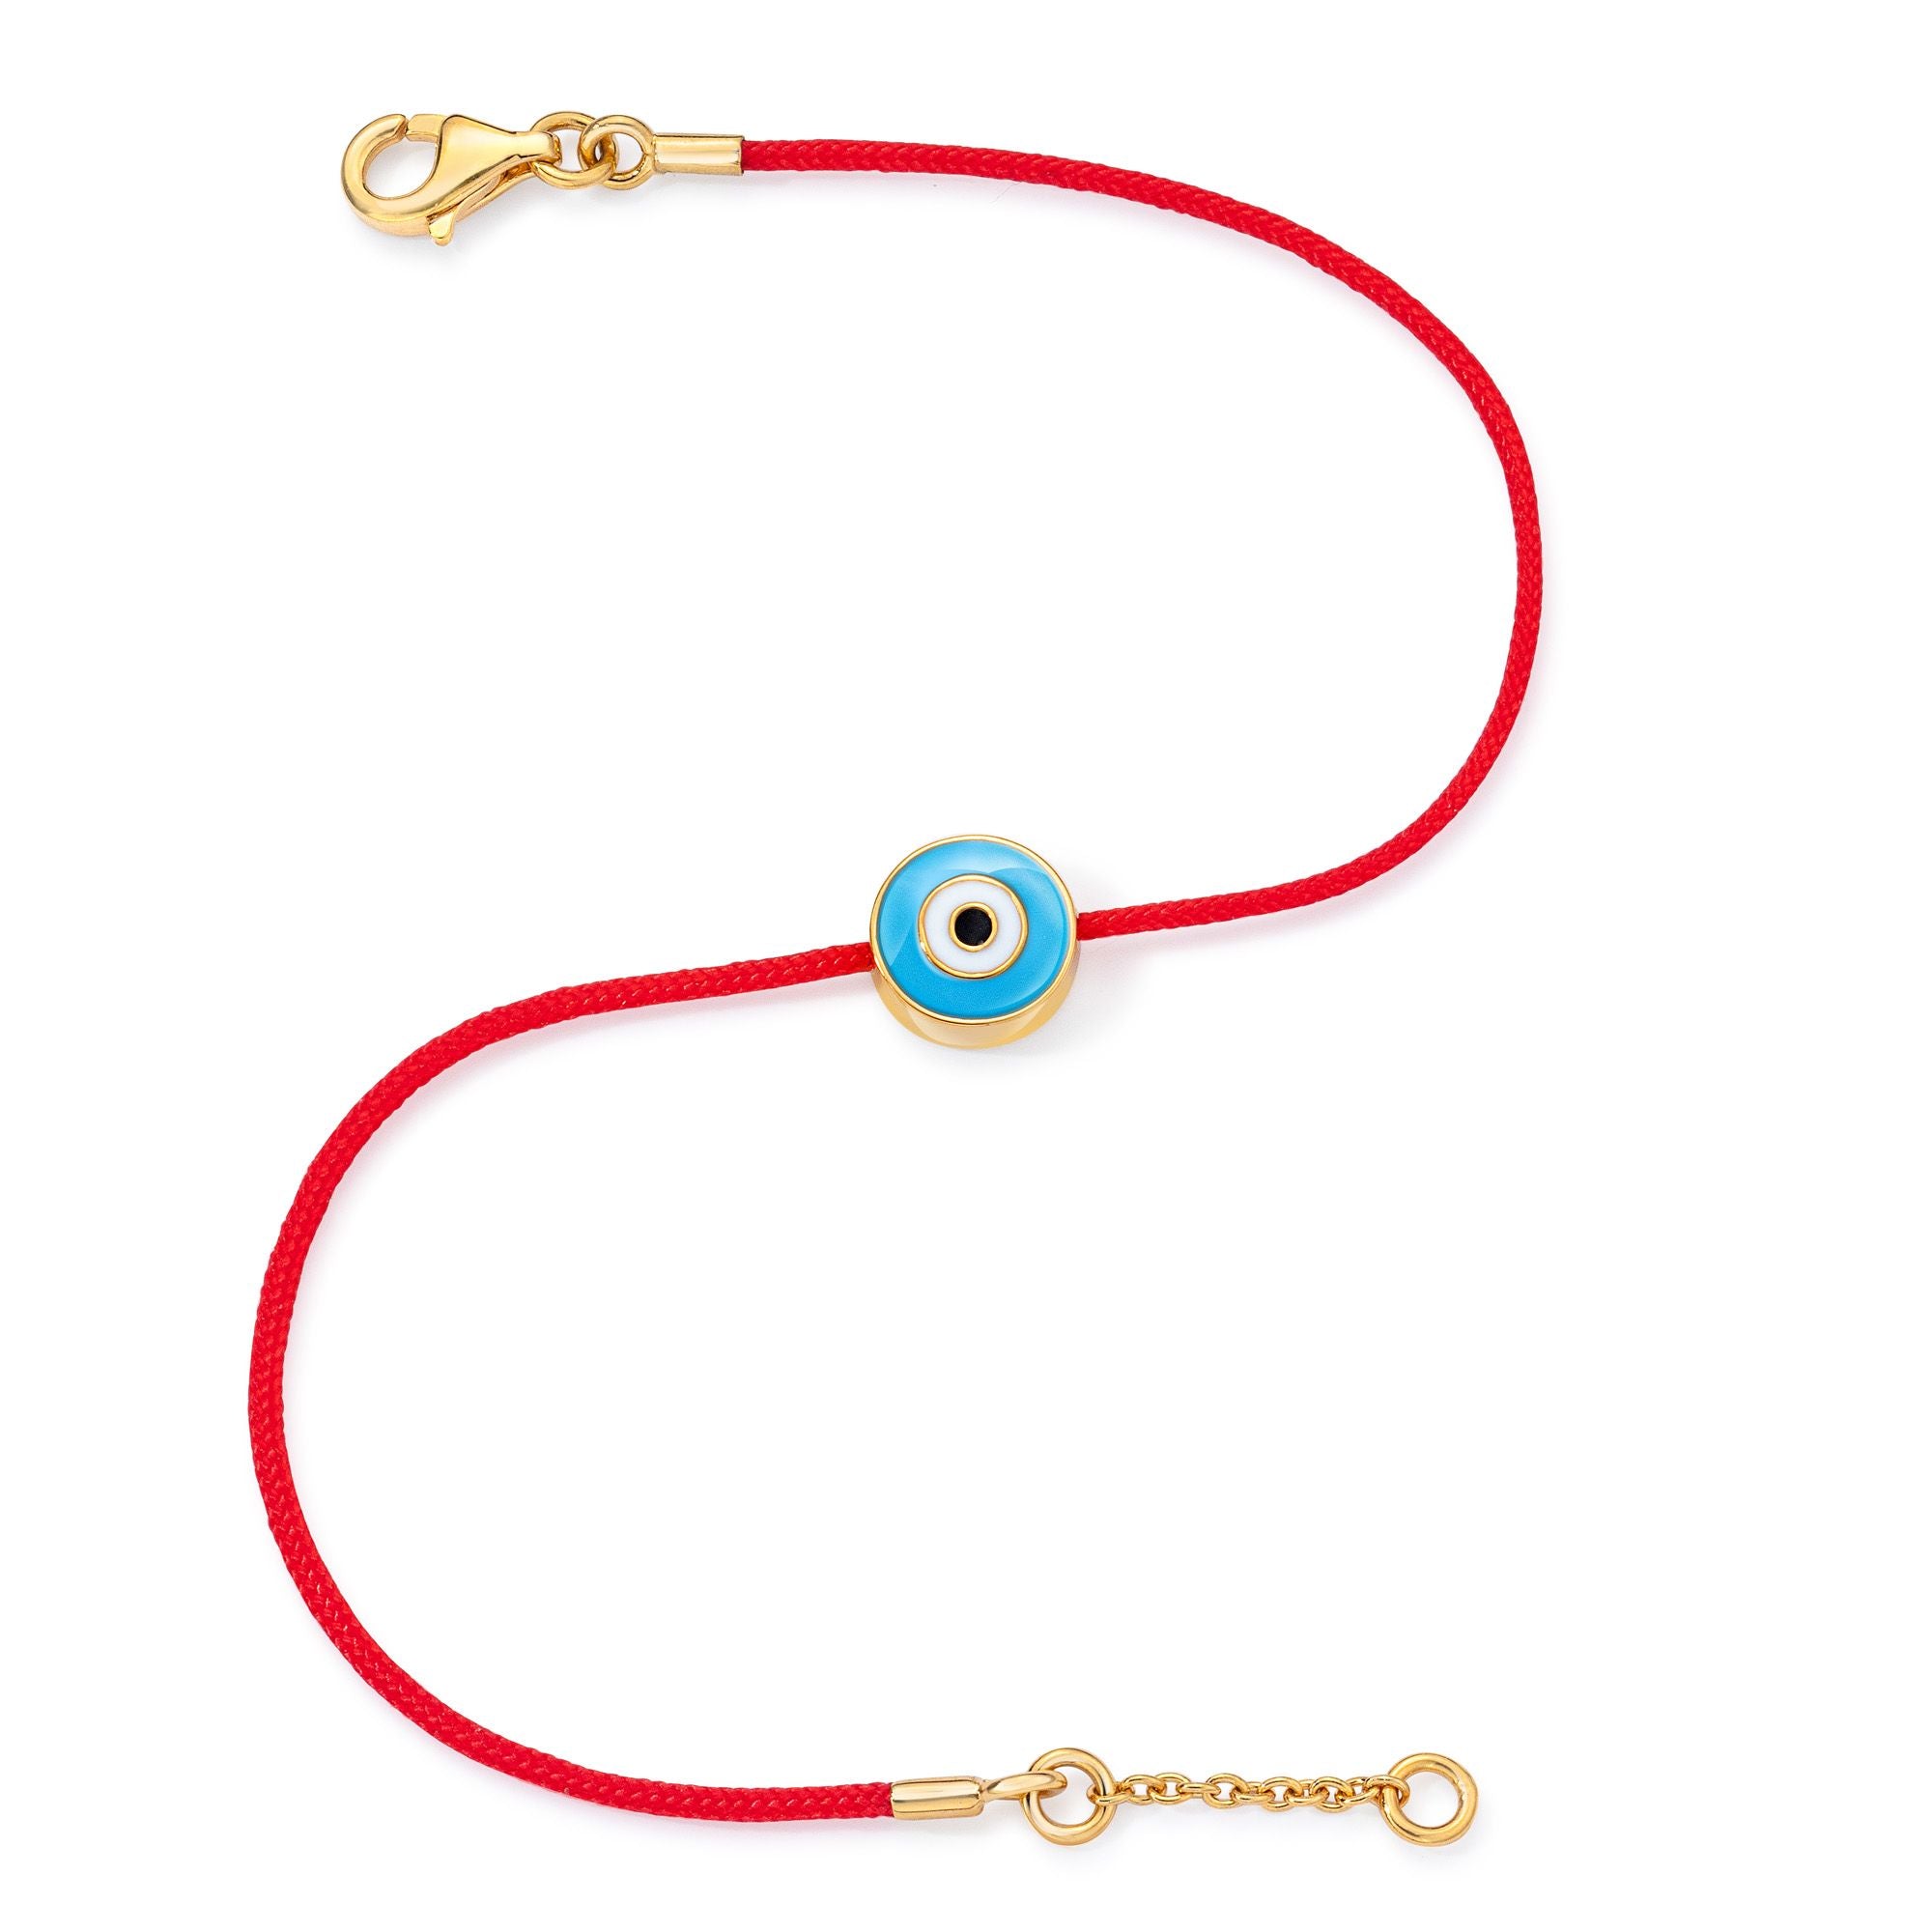 Buy DHRUVS COLLECTION 925 Pure Silver Adjustable Silver Chain Evil Eye  Bracelet For Teenage Girls & Women at Amazon.in